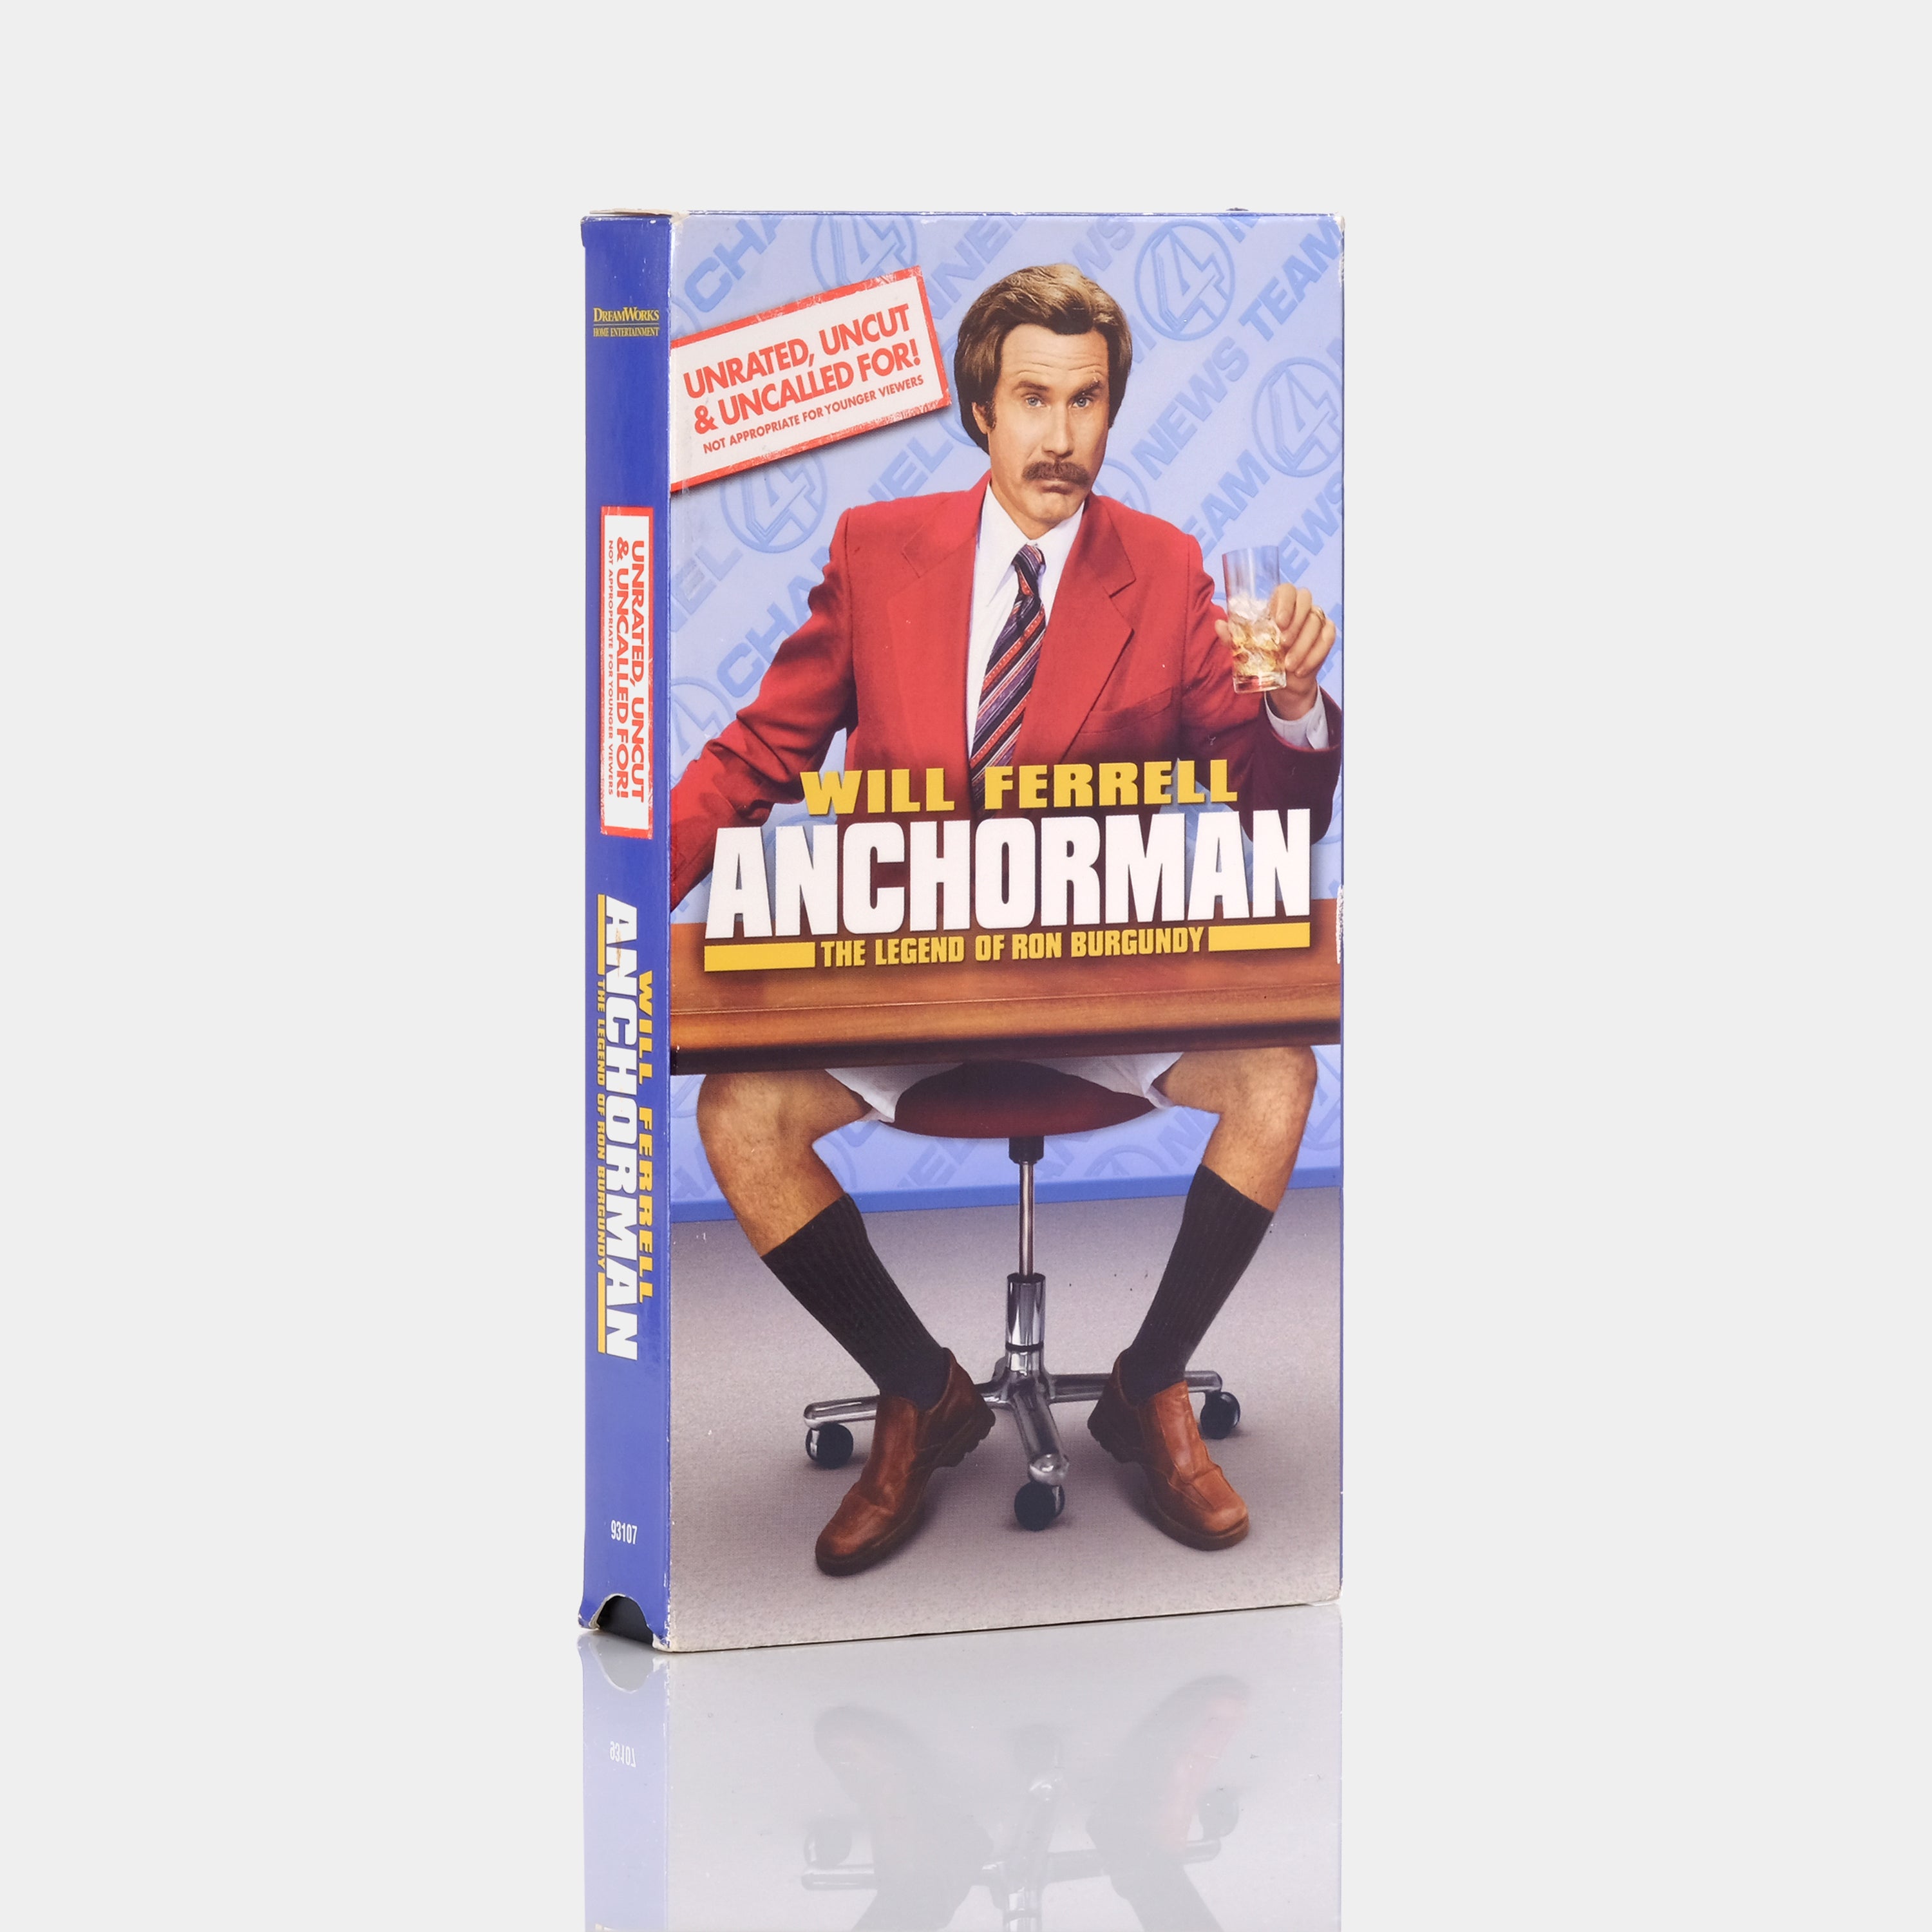 Anchorman: The Legend of Ron Burgundy (Unrated, Uncut and Uncalled For) VHS Tape